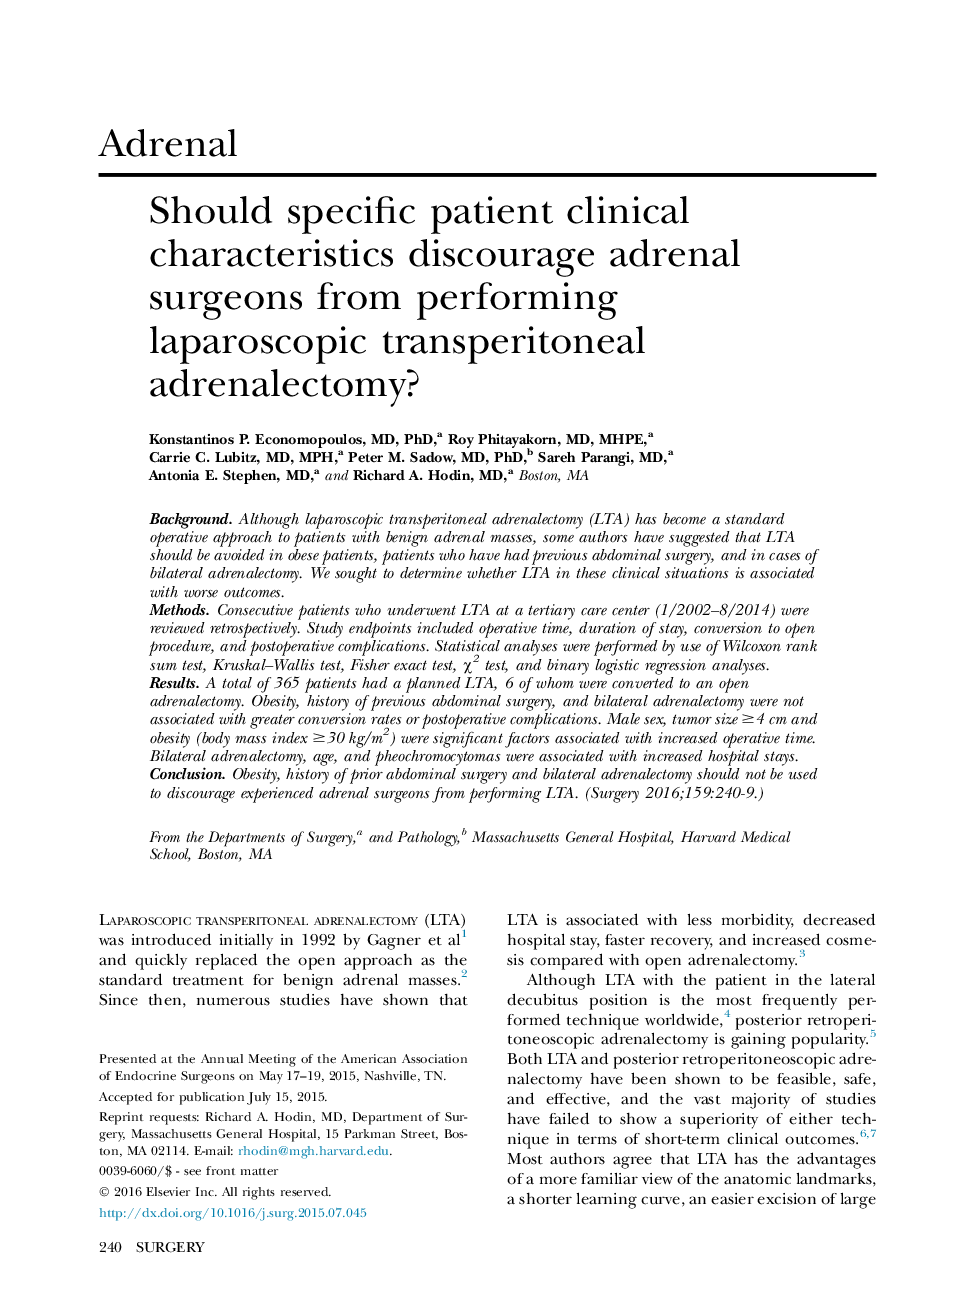 Should specific patient clinical characteristics discourage adrenal surgeons from performing laparoscopic transperitoneal adrenalectomy?